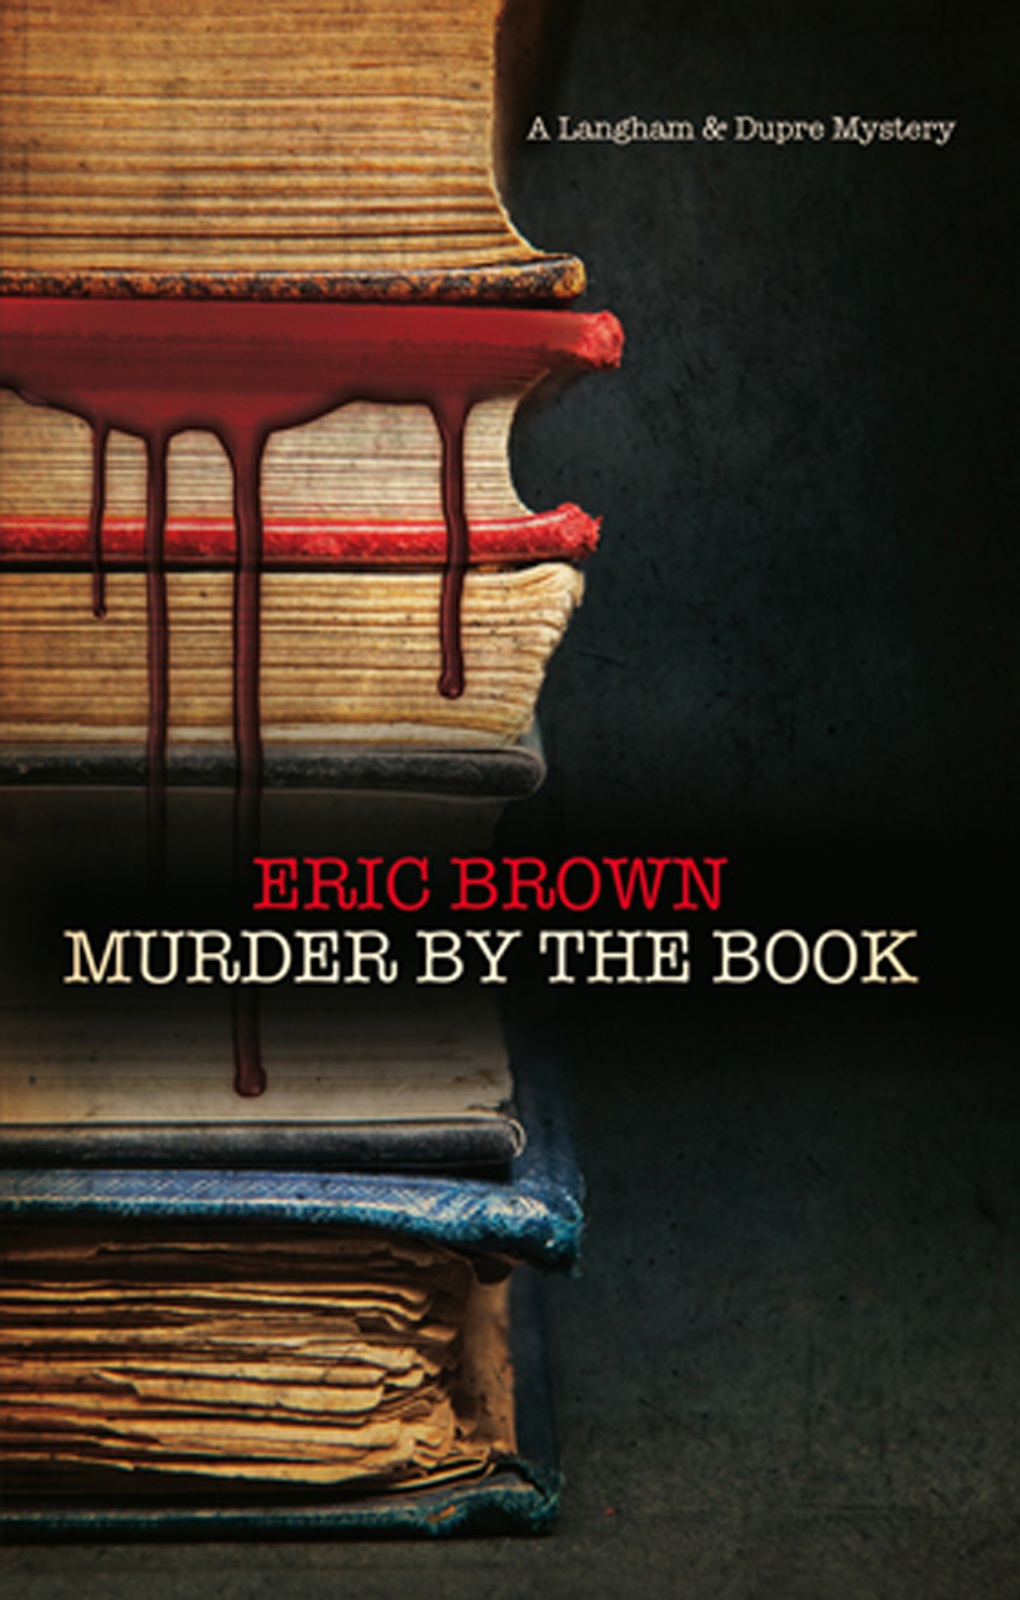 Murder by the Book (2013) by Eric Brown